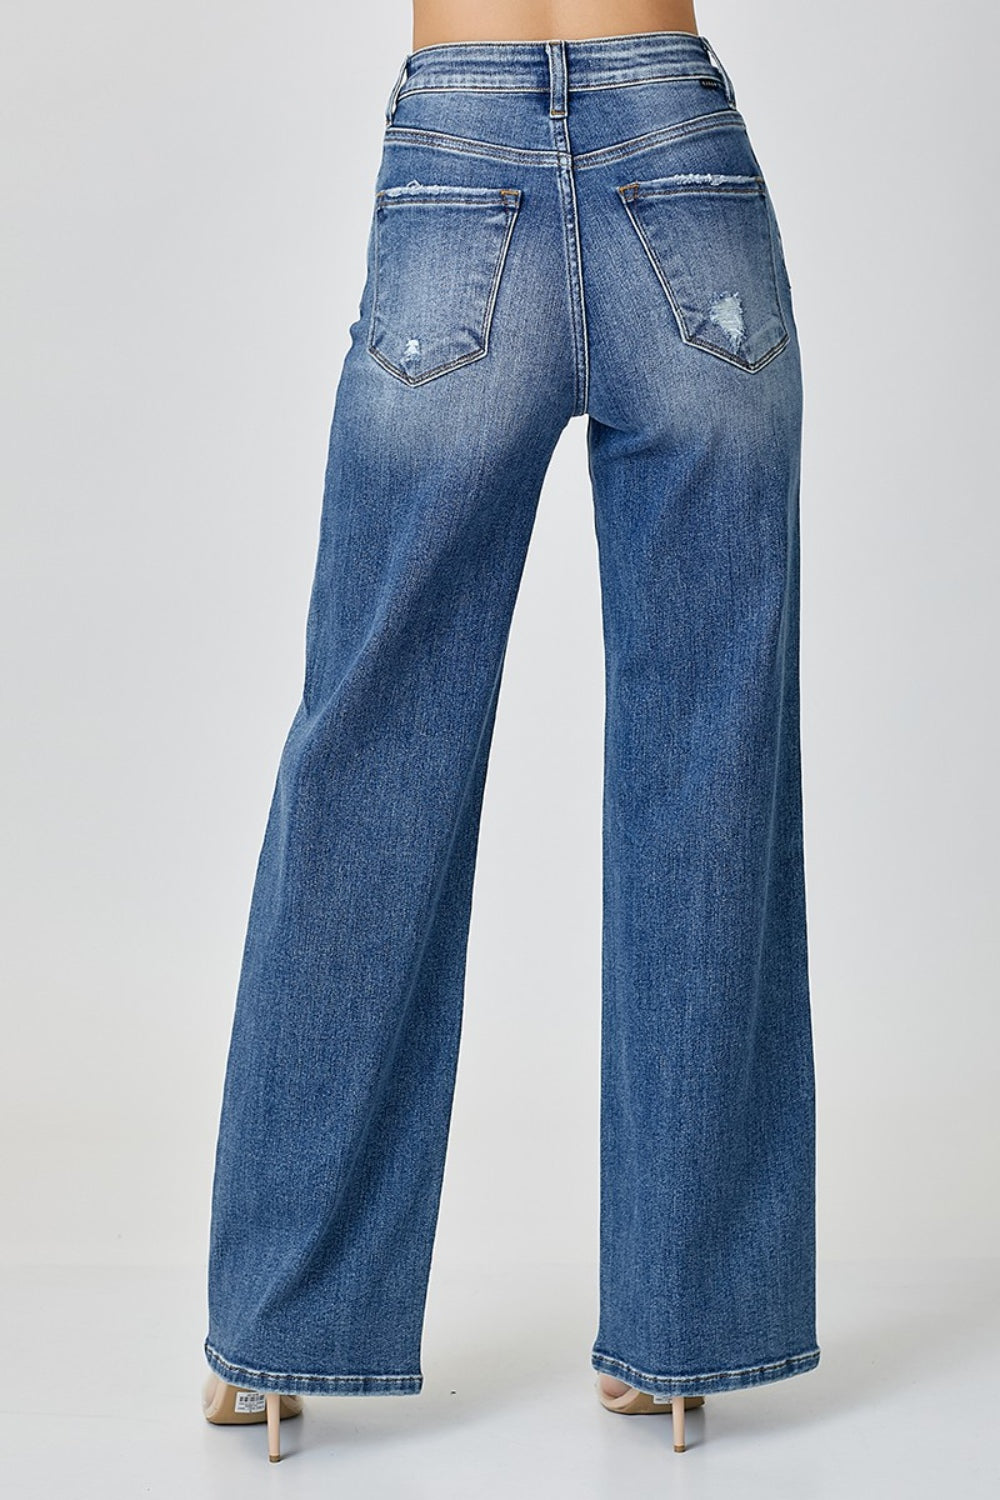 RISEN High Rise Wide Leg Jeans - Inspired Eye Boutique